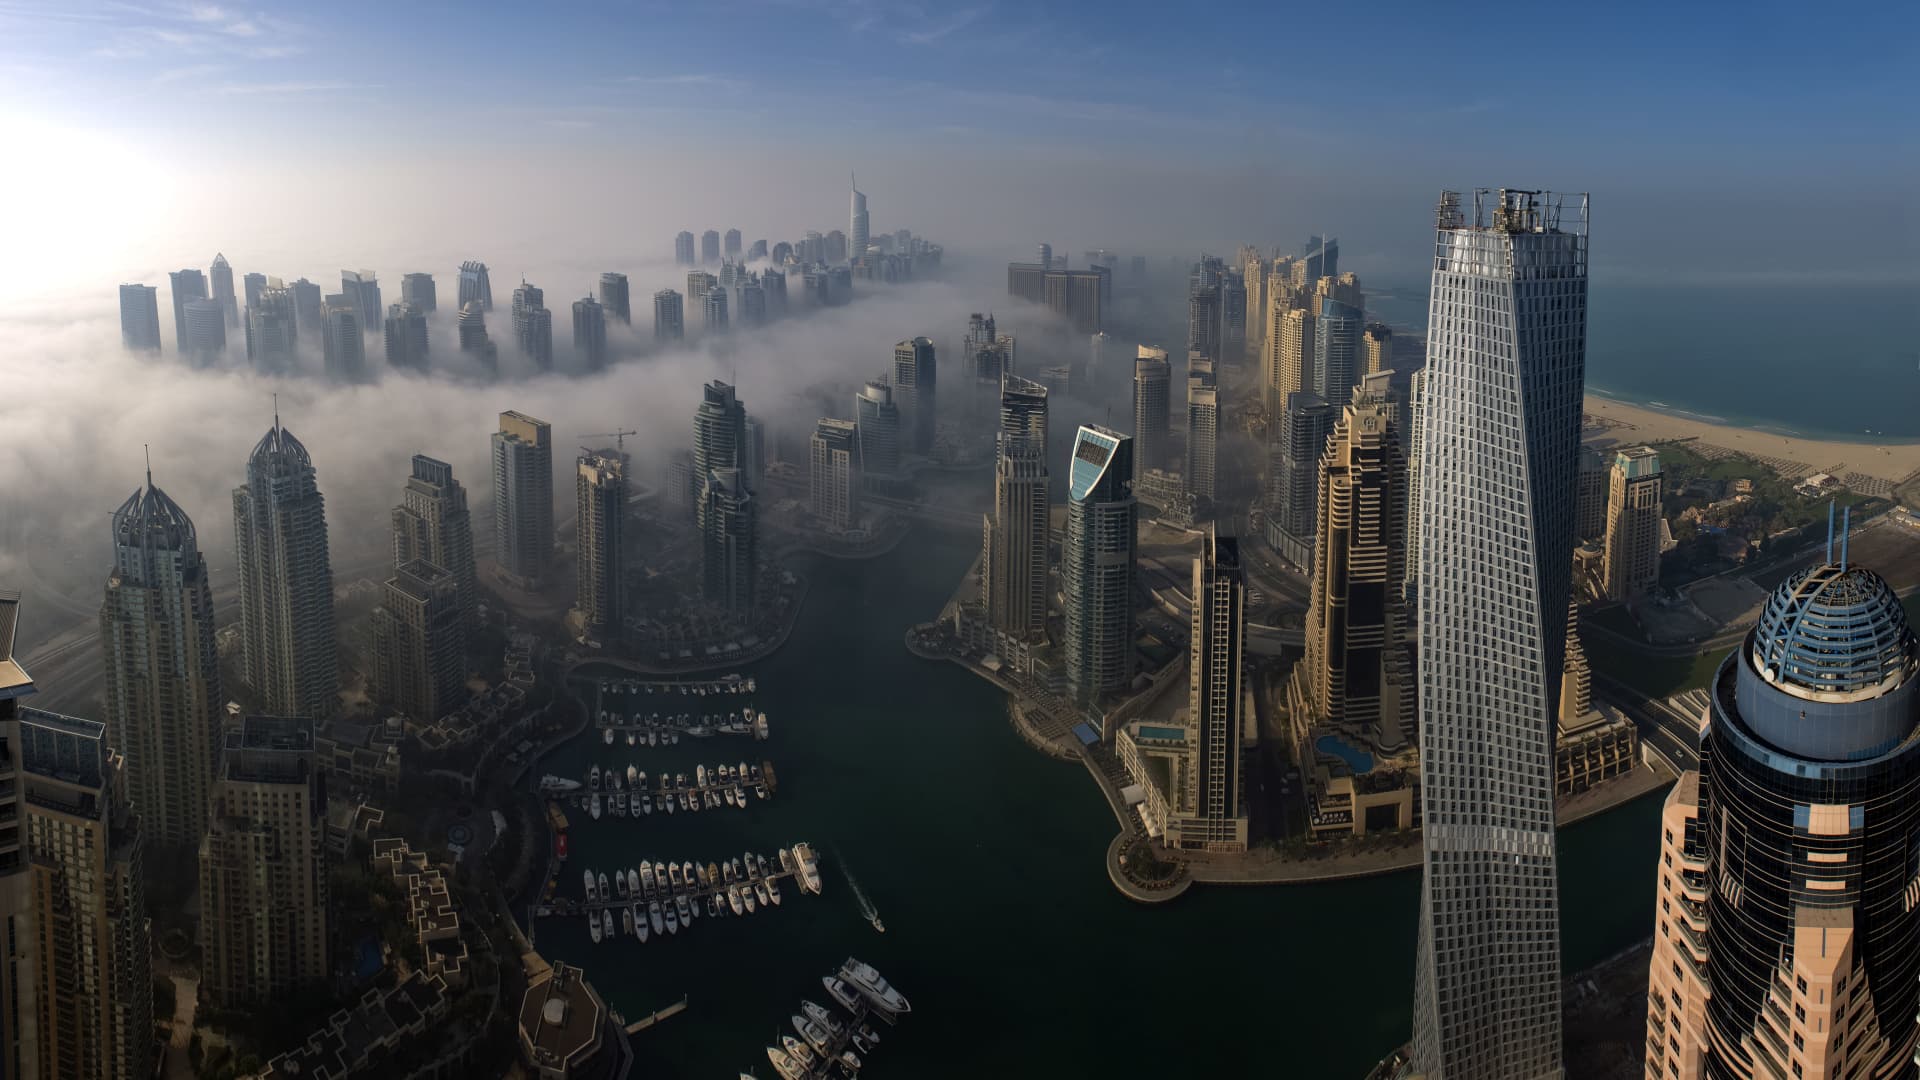 Russian demand for Dubai property is slowing — but China's is picking up, DAMAC chairman says